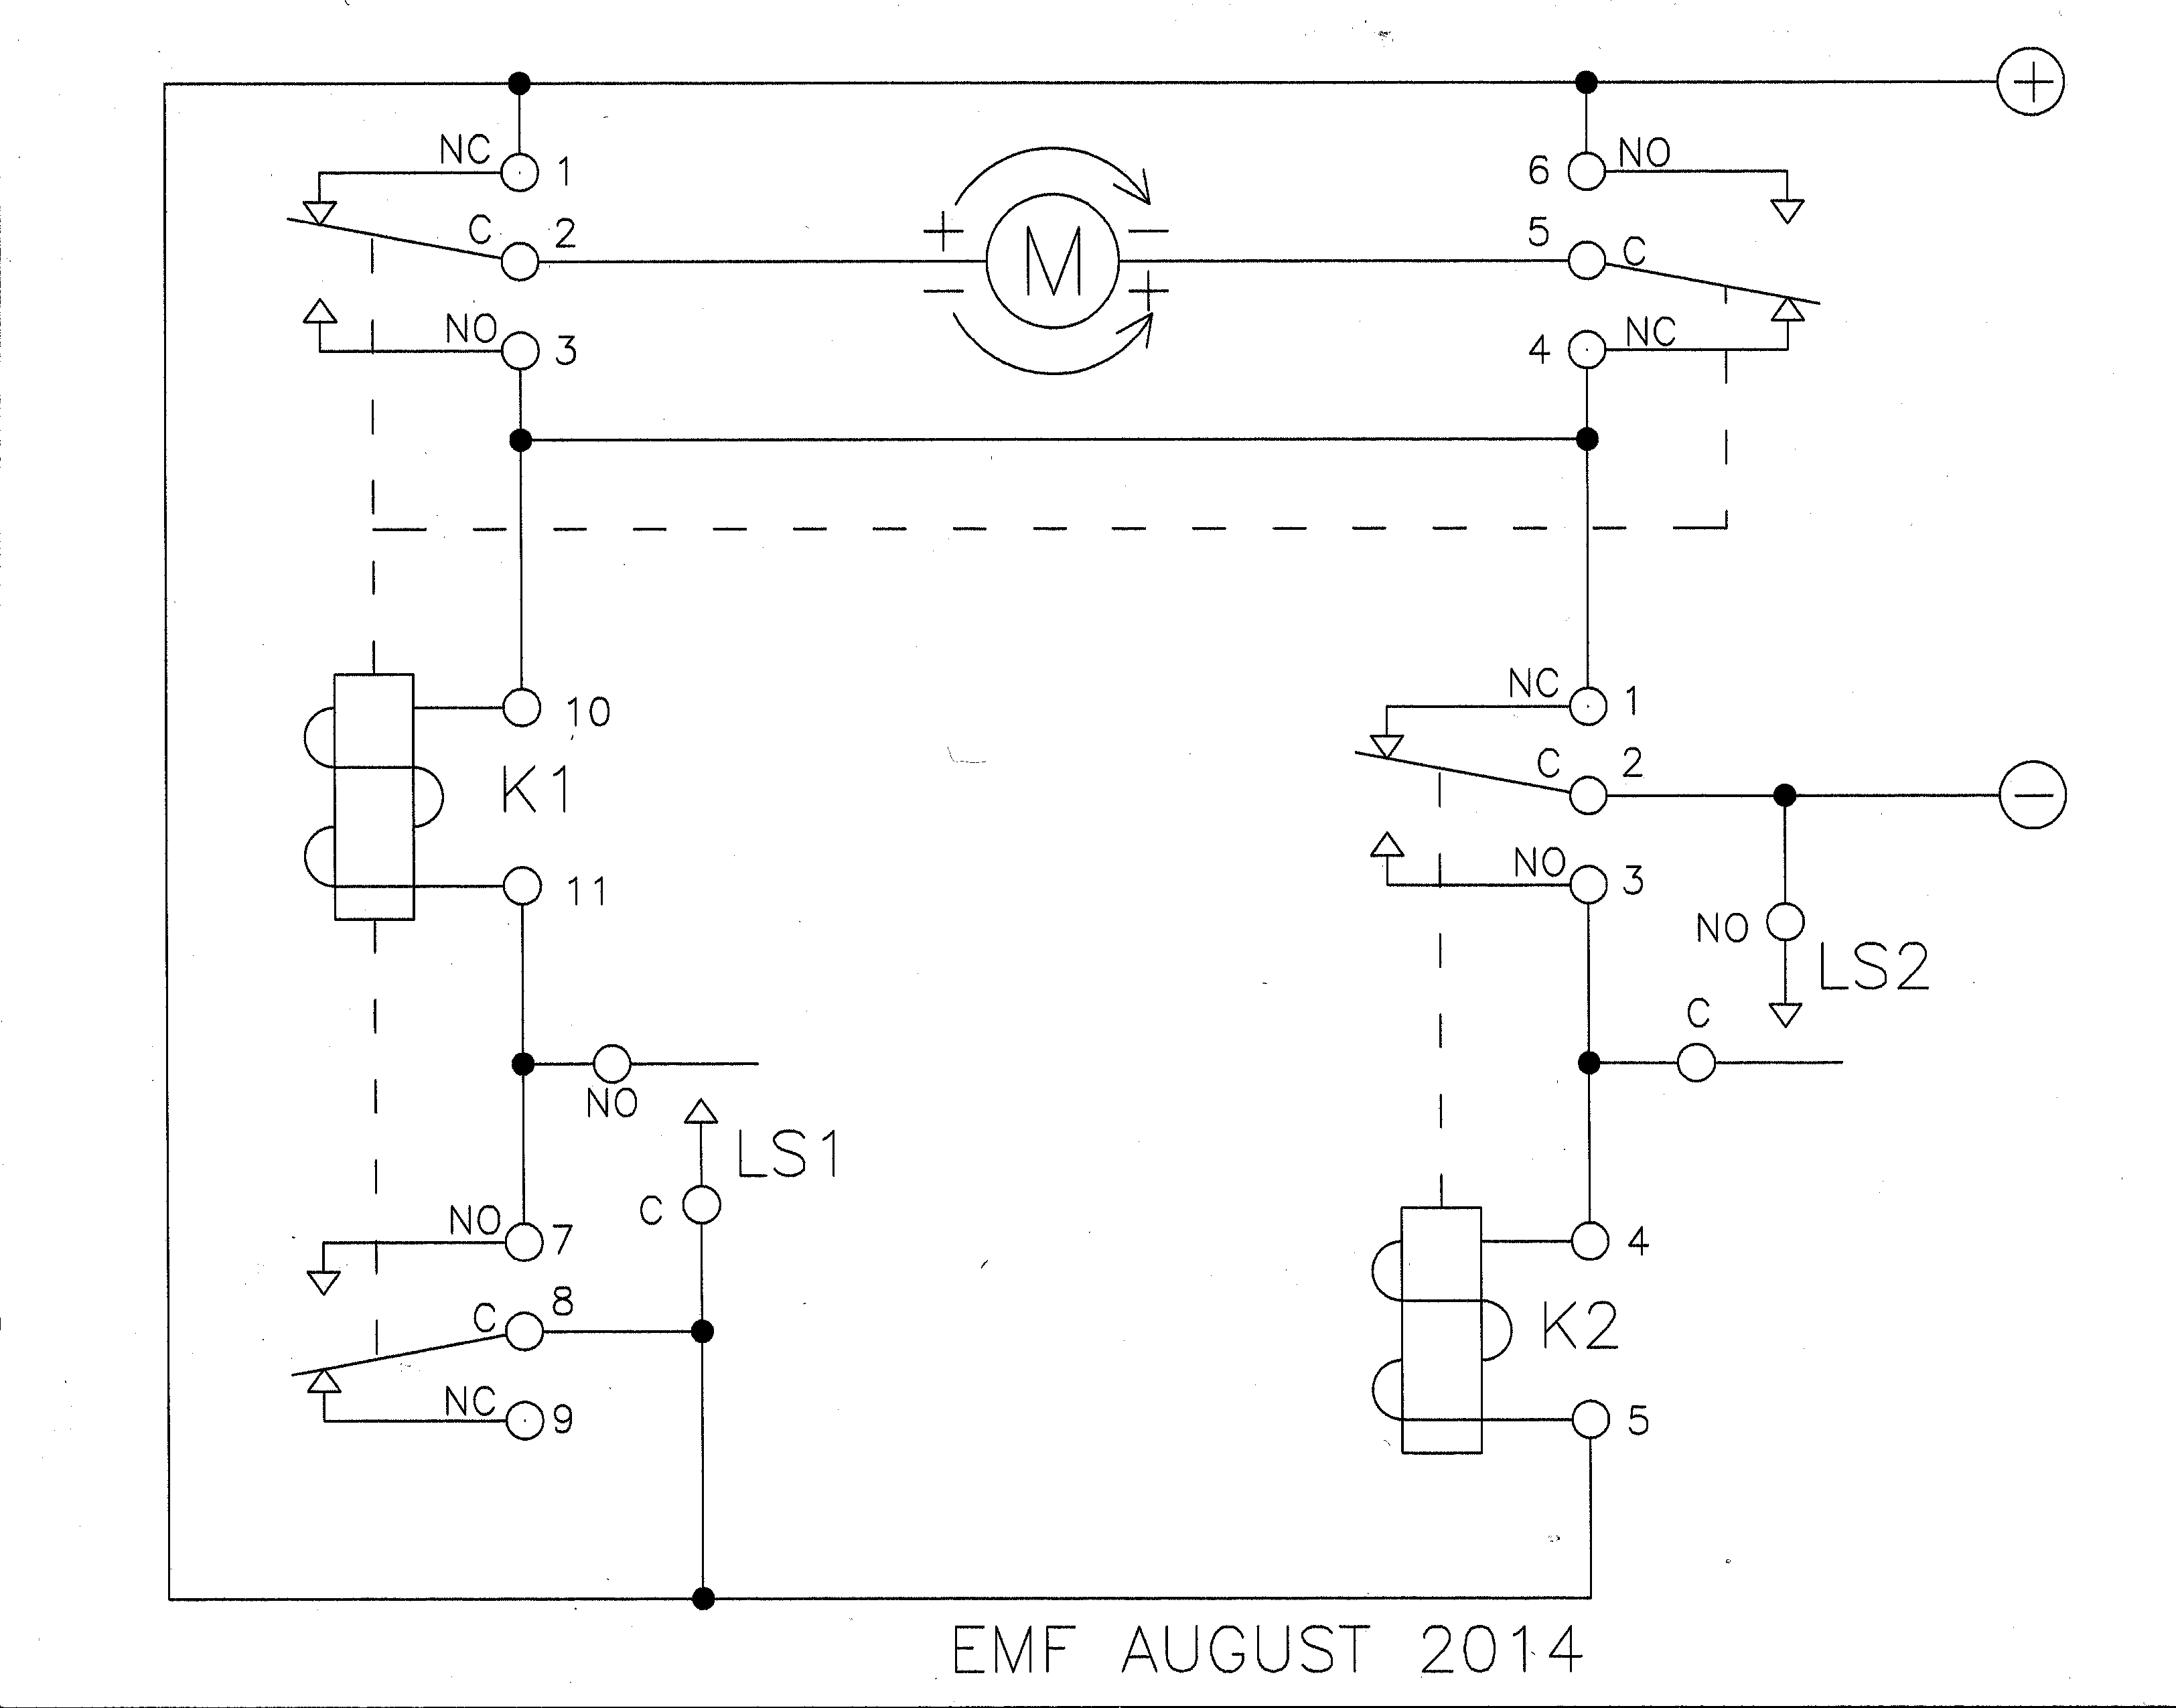 Relay - Limit Switches To Control Motor Direction - Electrical - 12 Volt Relay Wiring Diagram